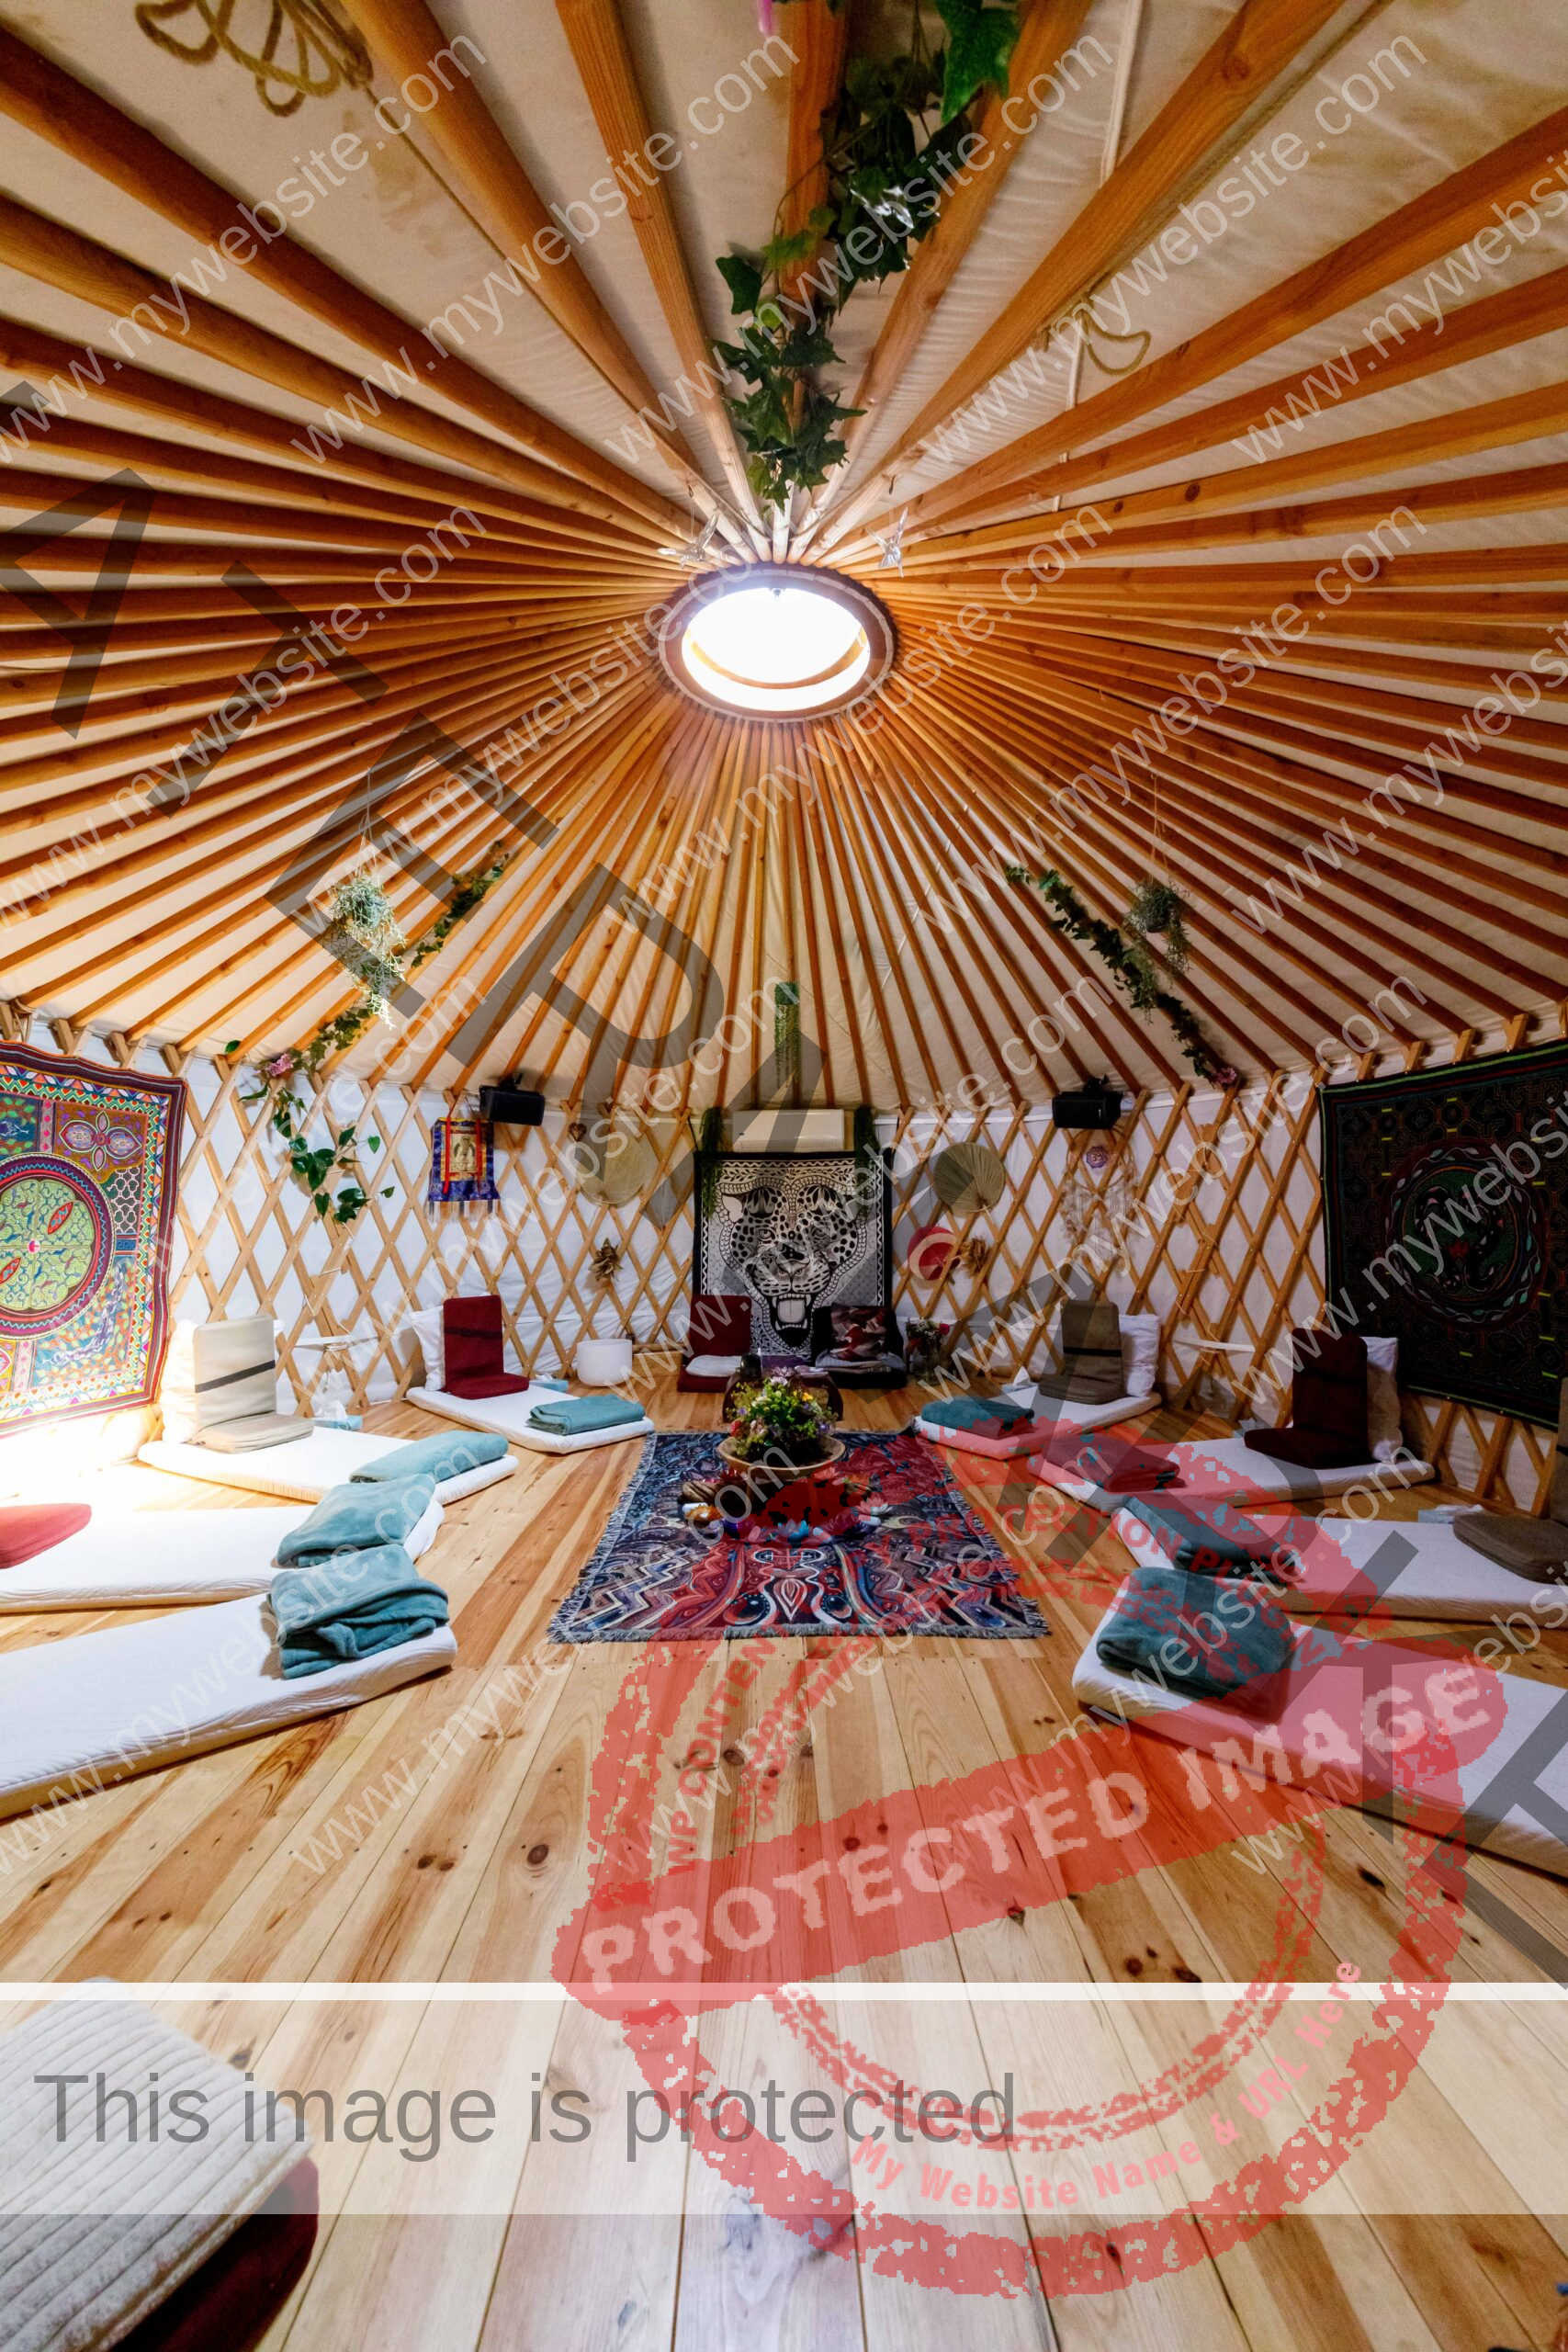 Ceremonial Yurt with wooden floor, mattresses, meditation seats and sealing with a window